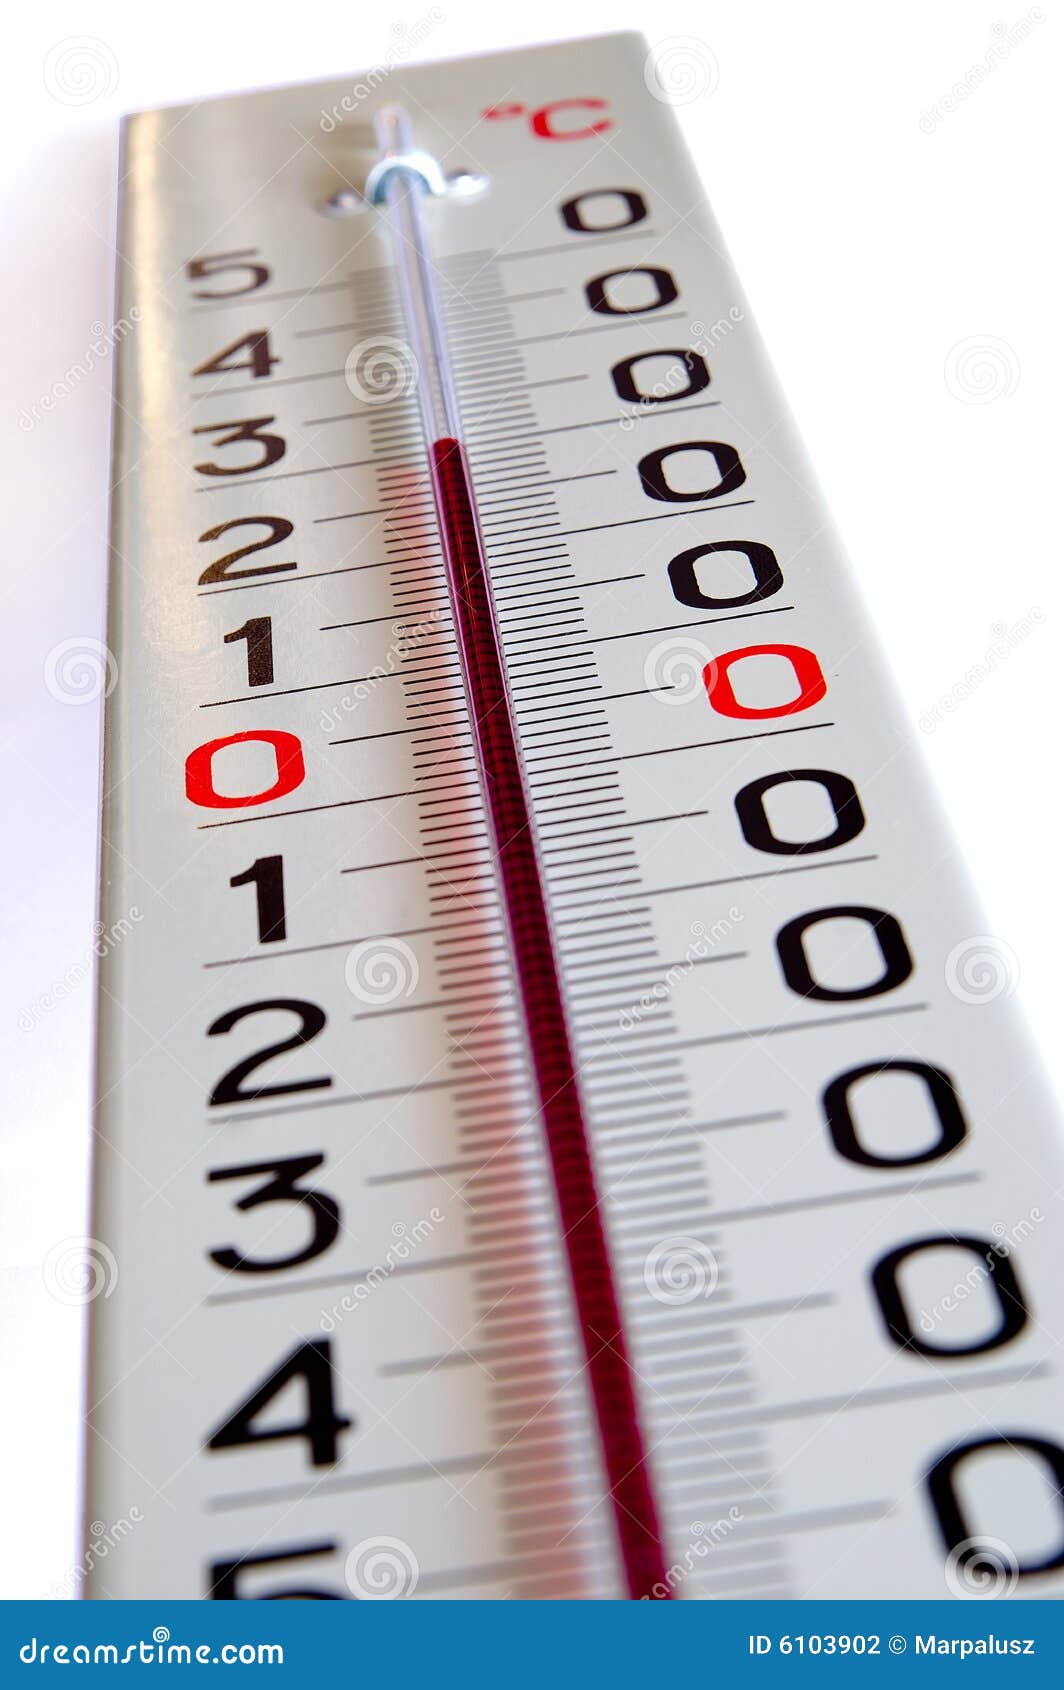 Dakloos Roestig filosofie Grote buitenthermometer stock foto. Image of warm, rood - 6103902